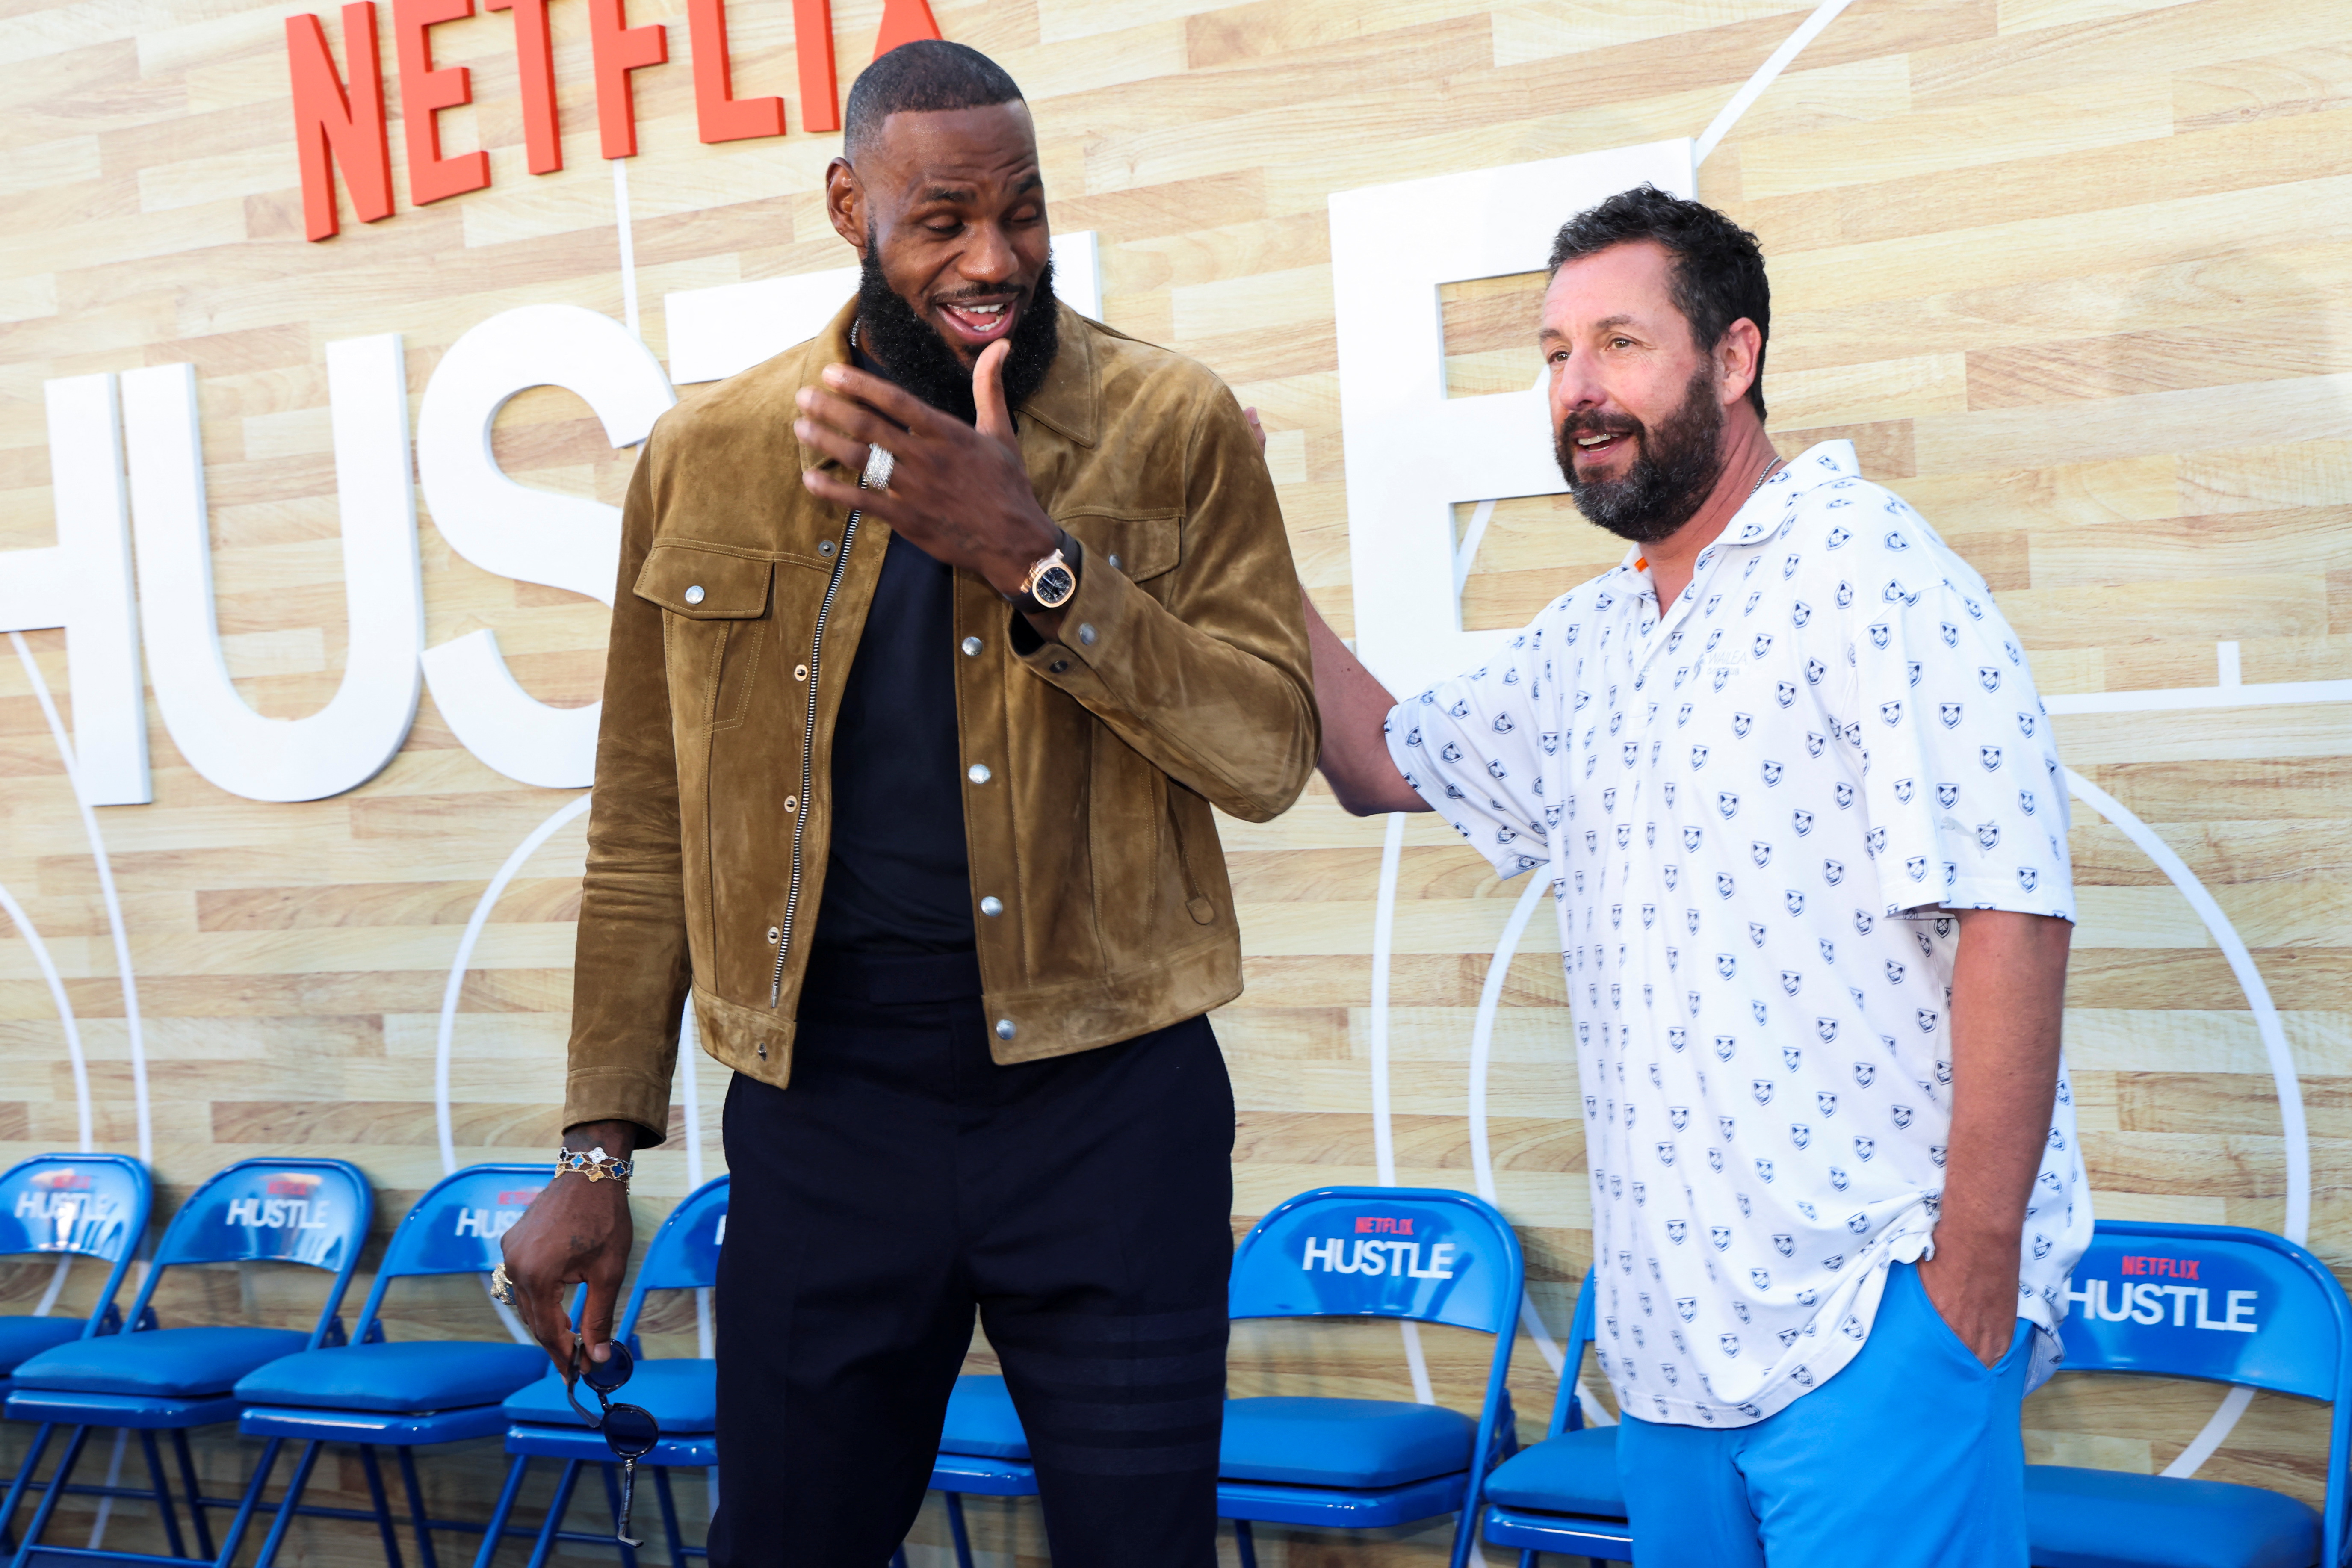 Cast members LeBron James and Adam Sandler attend a premiere for the film "Hustle" in Los Angeles, California, U.S., June 1, 2022. REUTERS/Mario Anzuoni